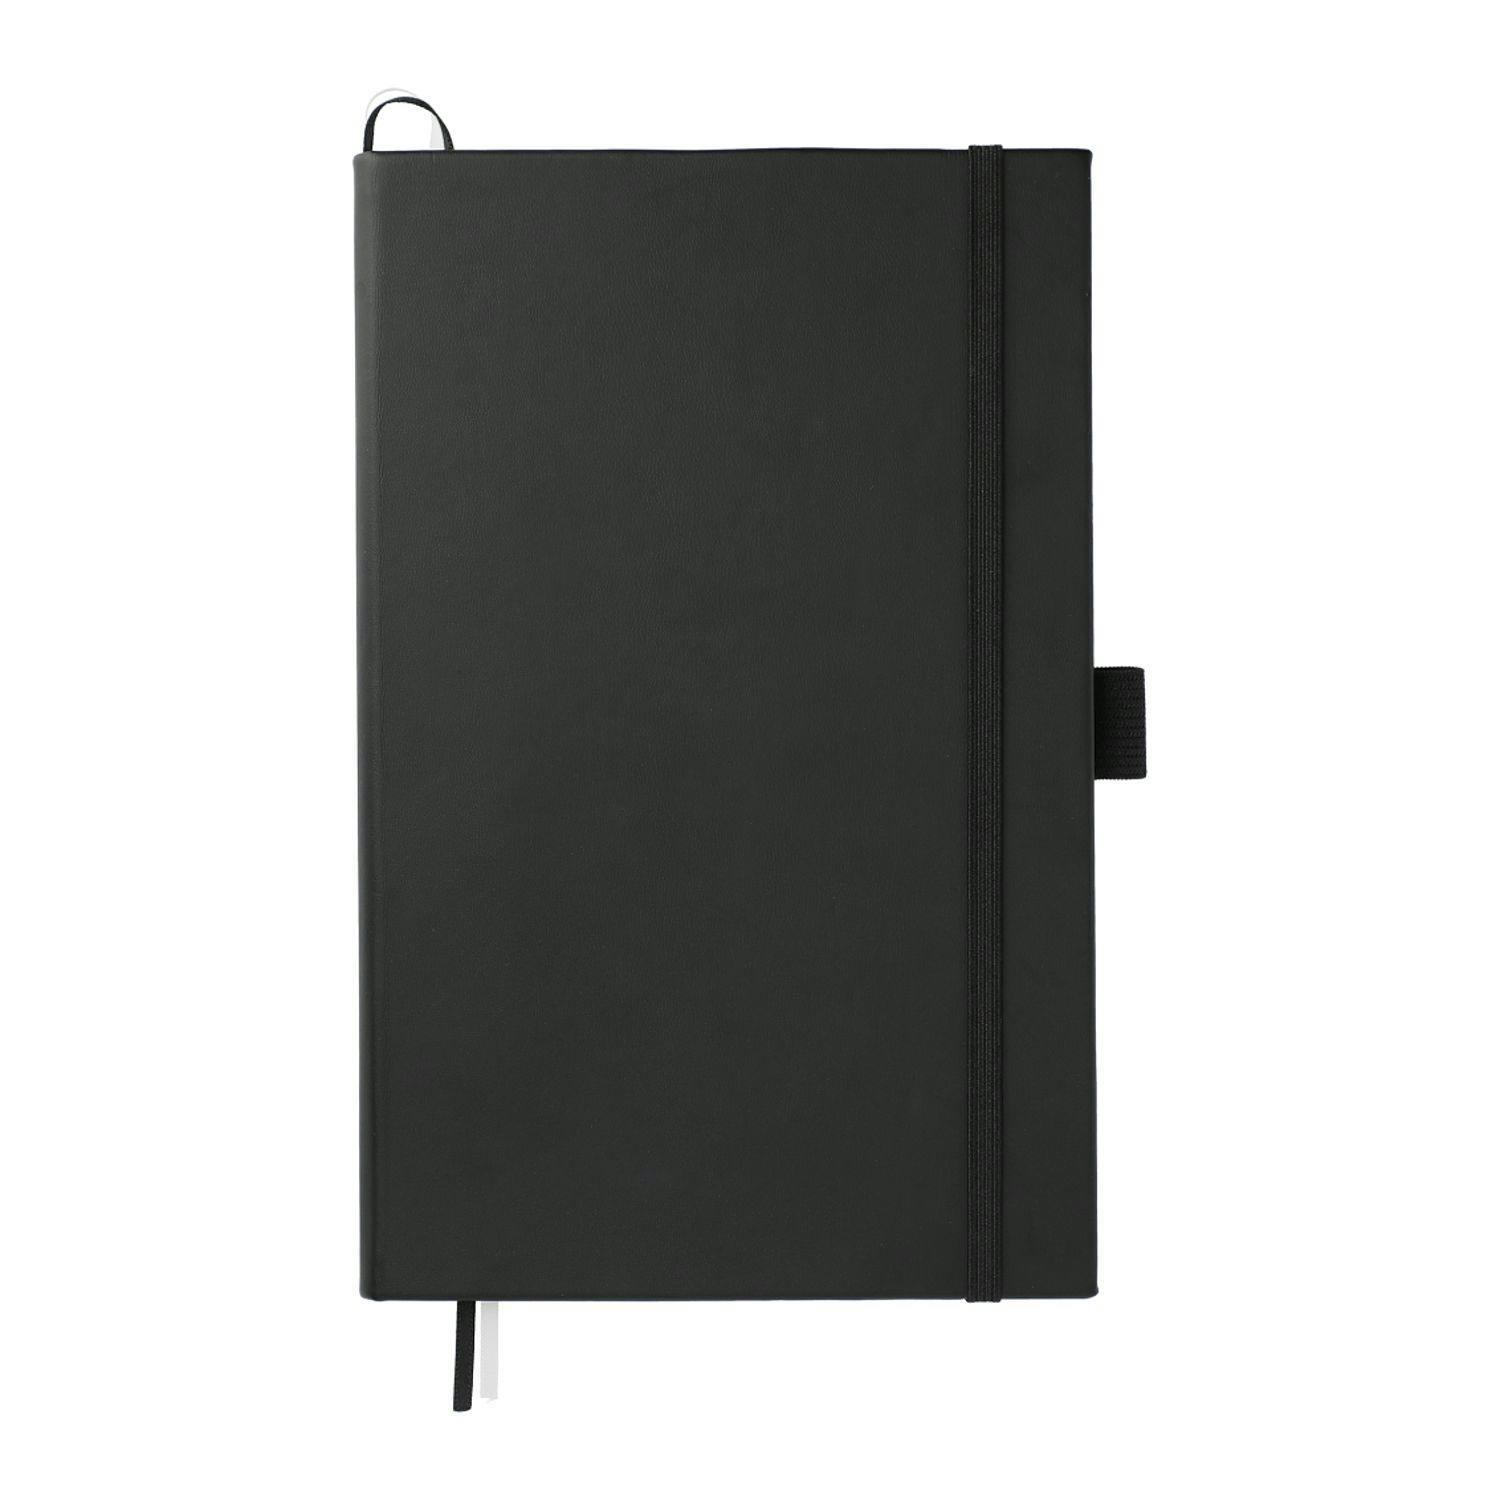 5.5" x 8.5" FUNCTION Bulleting Notebook - additional Image 1